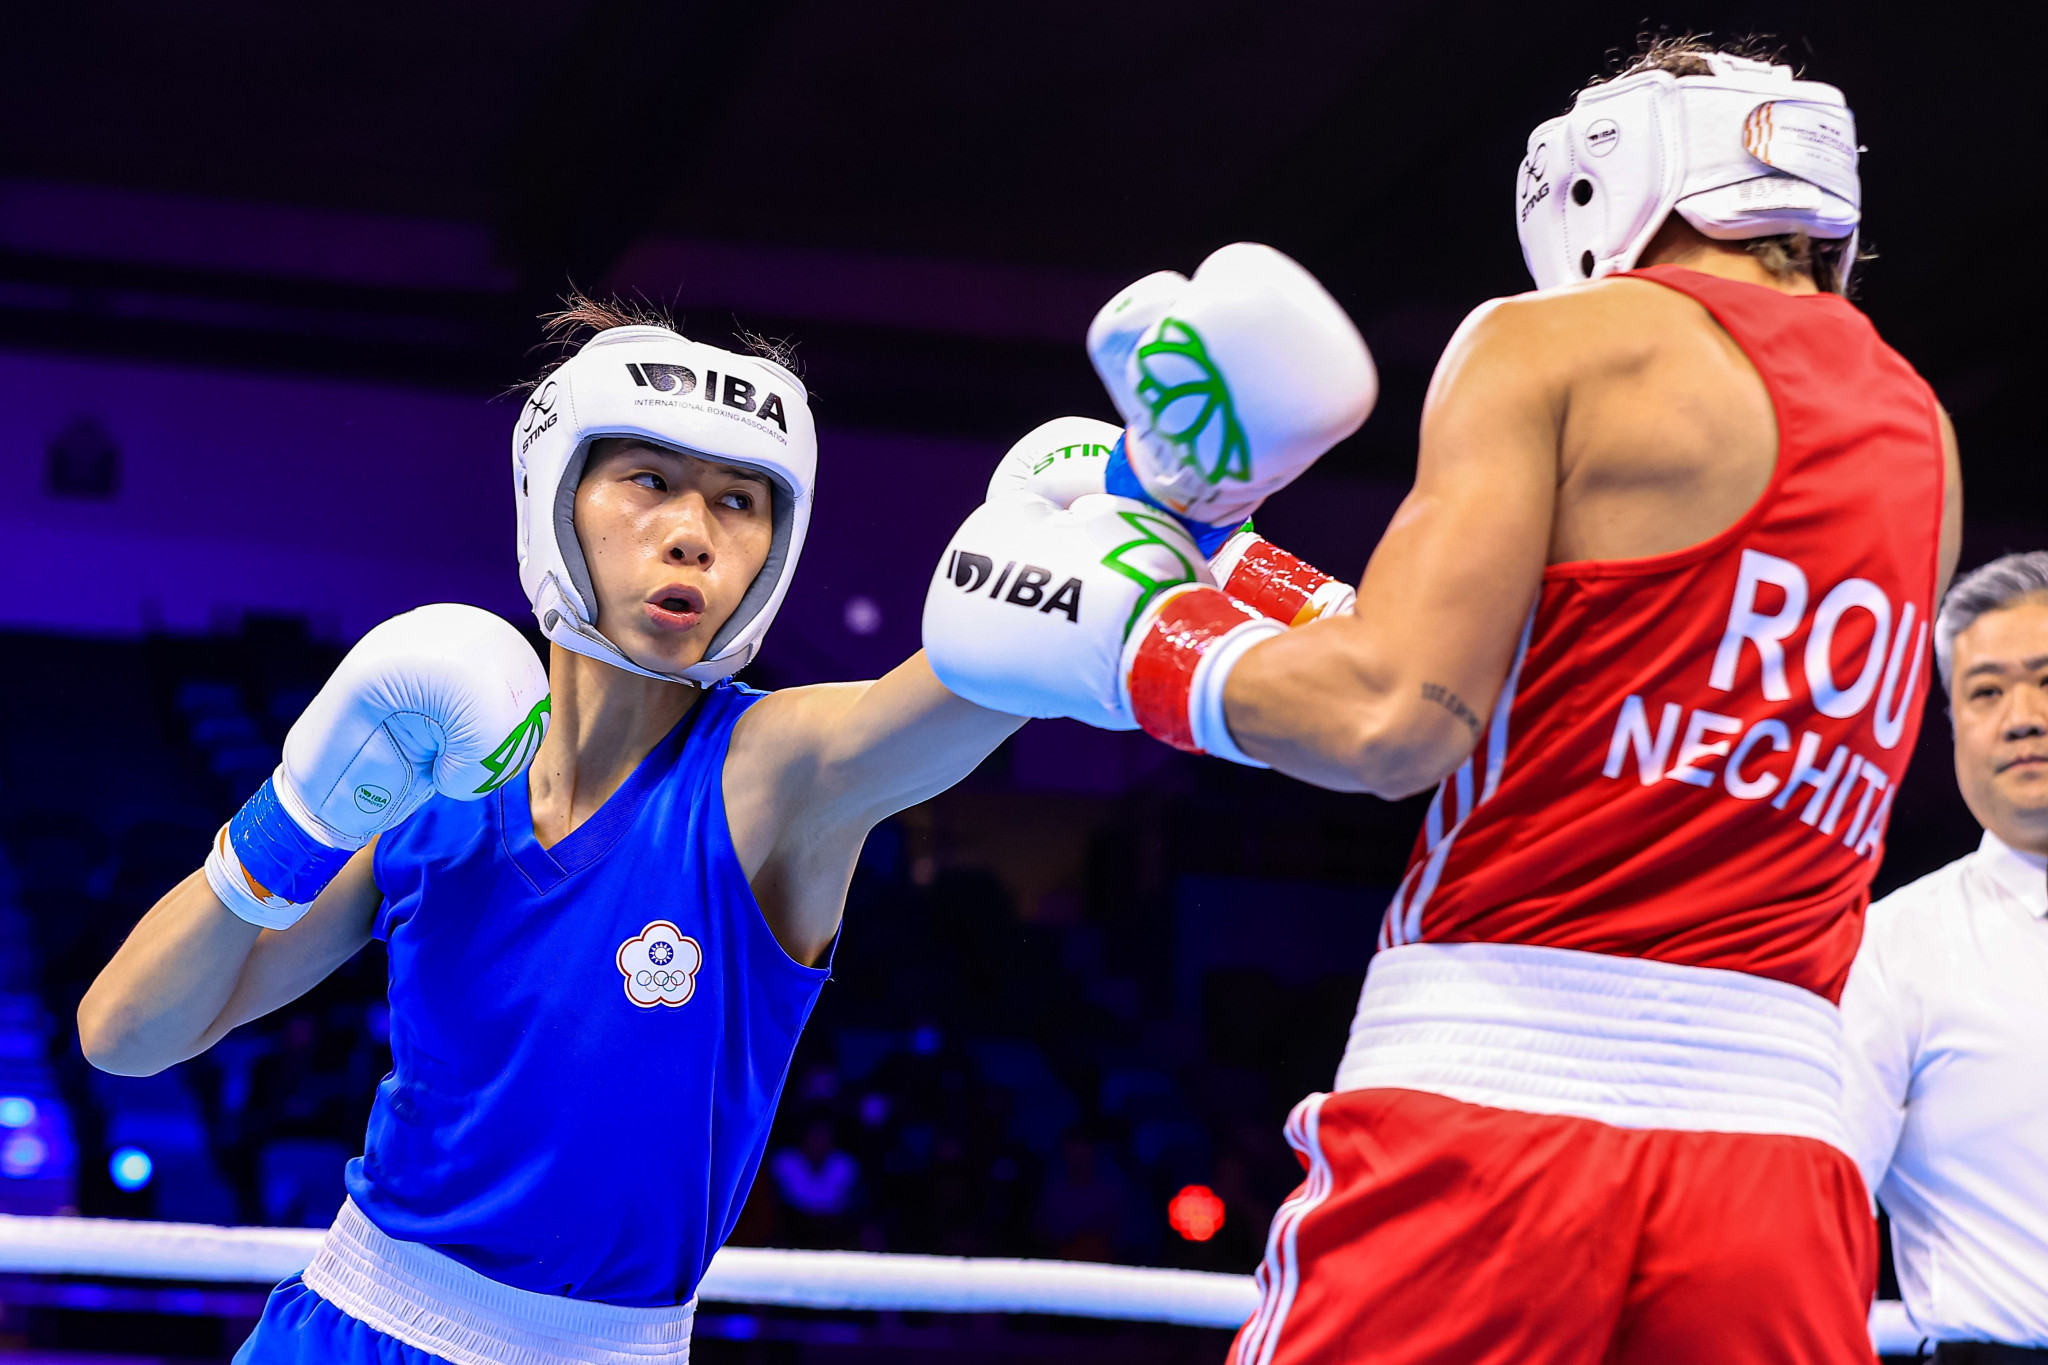 Lin Yu-ting of Chinese Taipei started her defence of the featherweight crown with victory over Claudia Nechita of Romania ©IBA